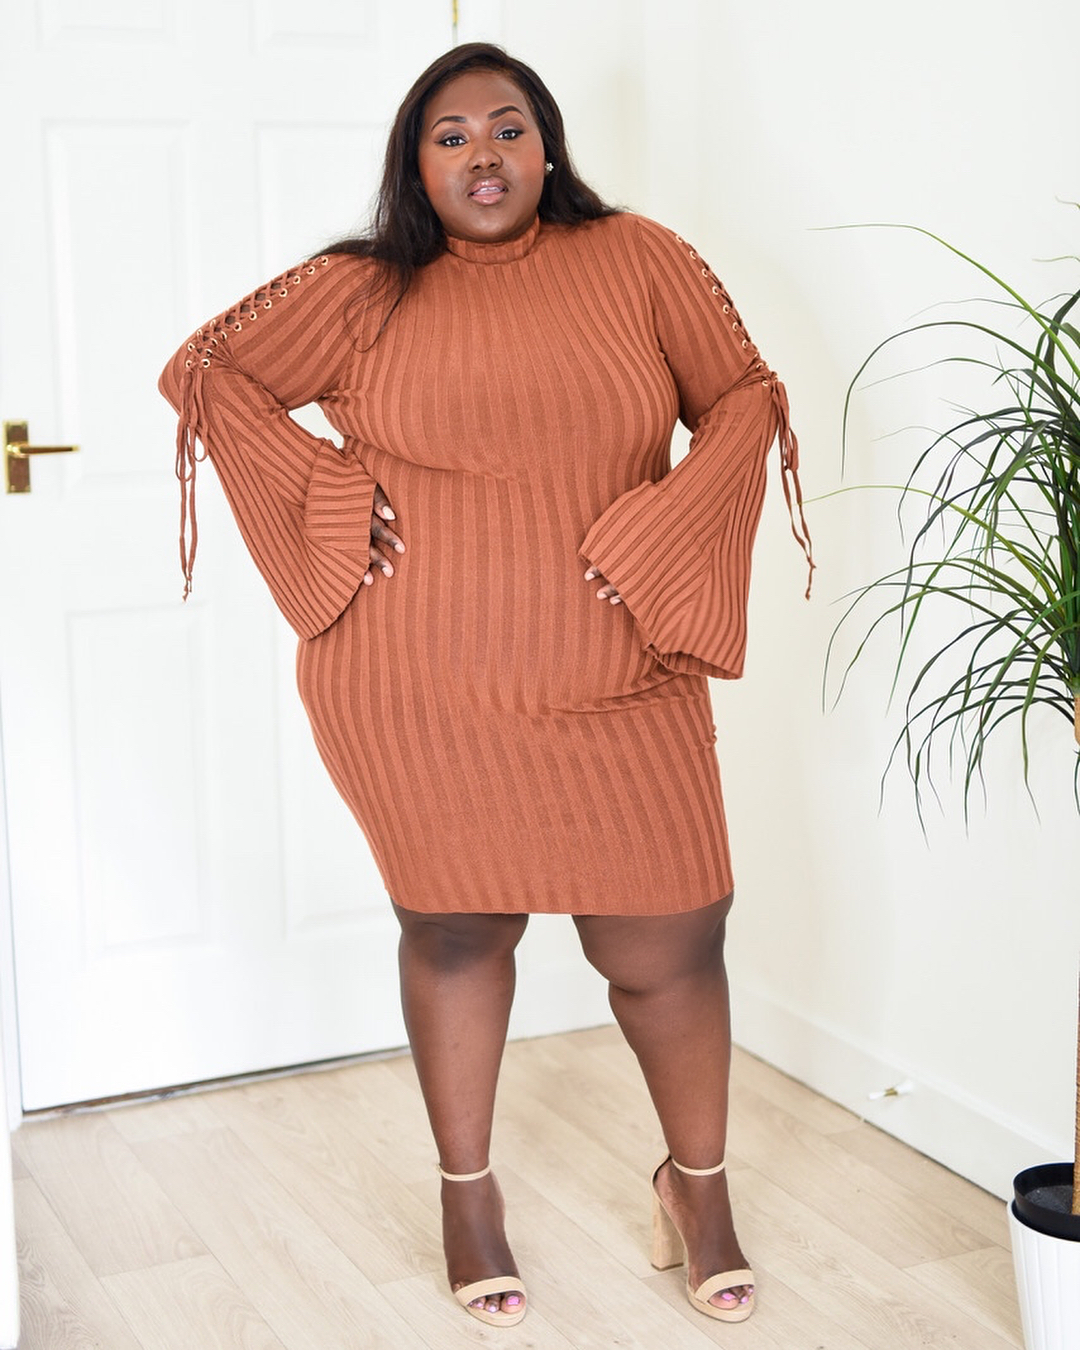 Chanel Ambrose: 4 Date Night Looks for the Plus Size BellaStylista